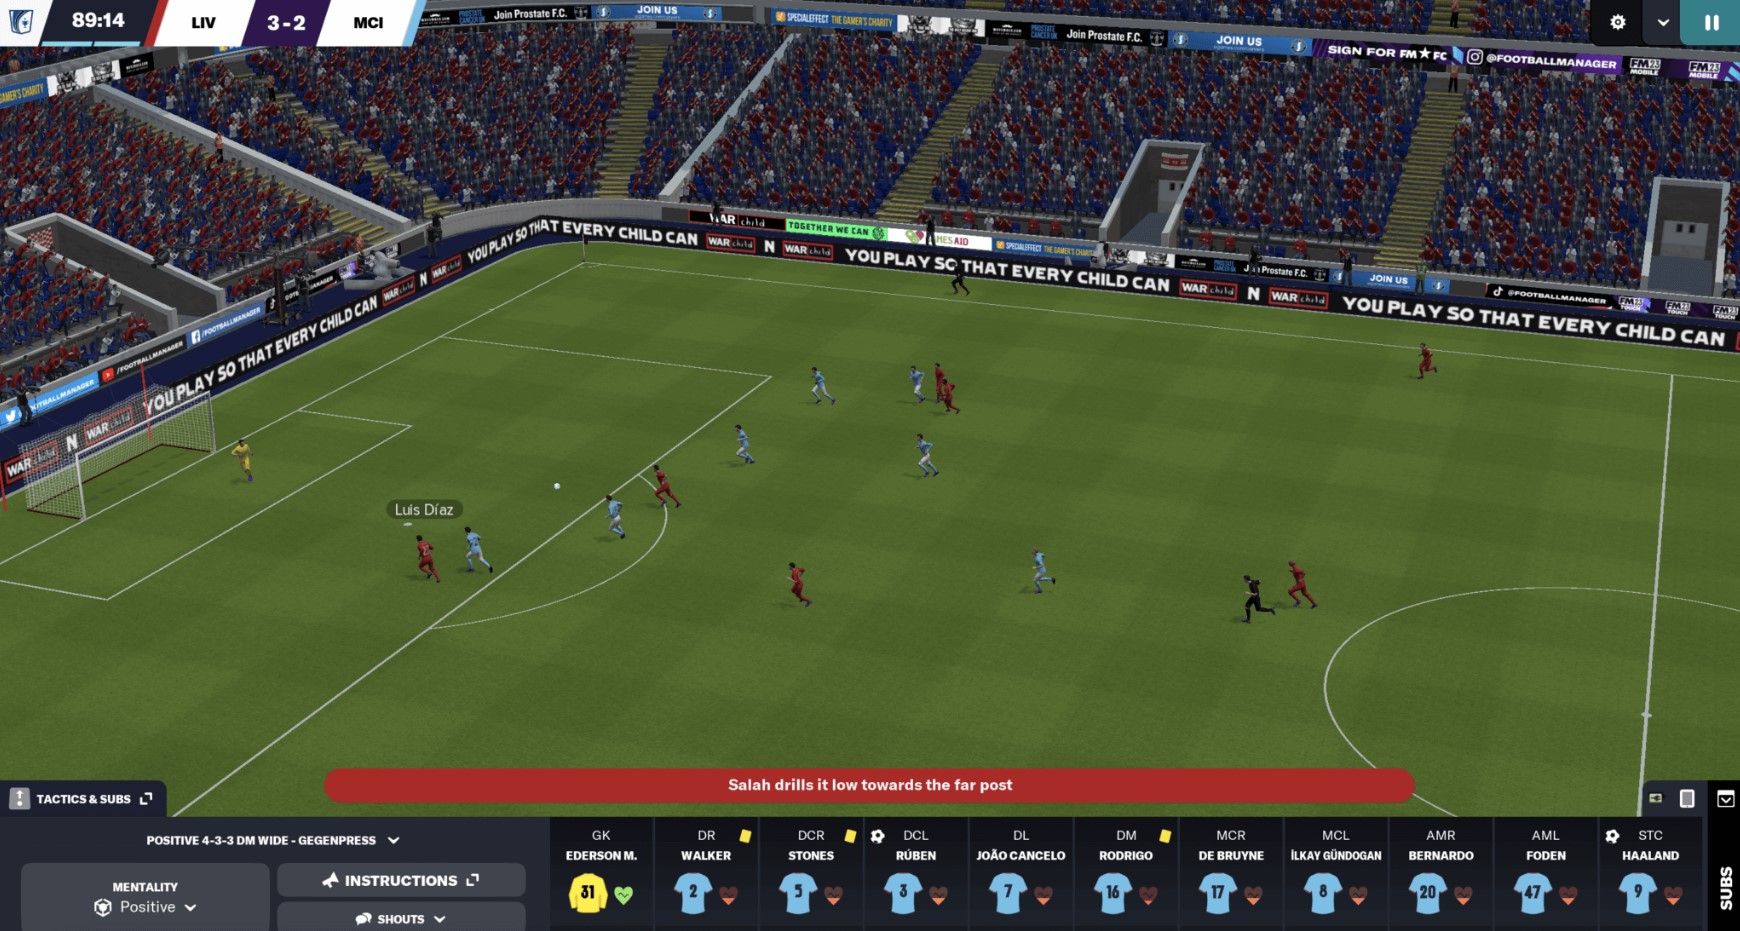 Football Manager 23